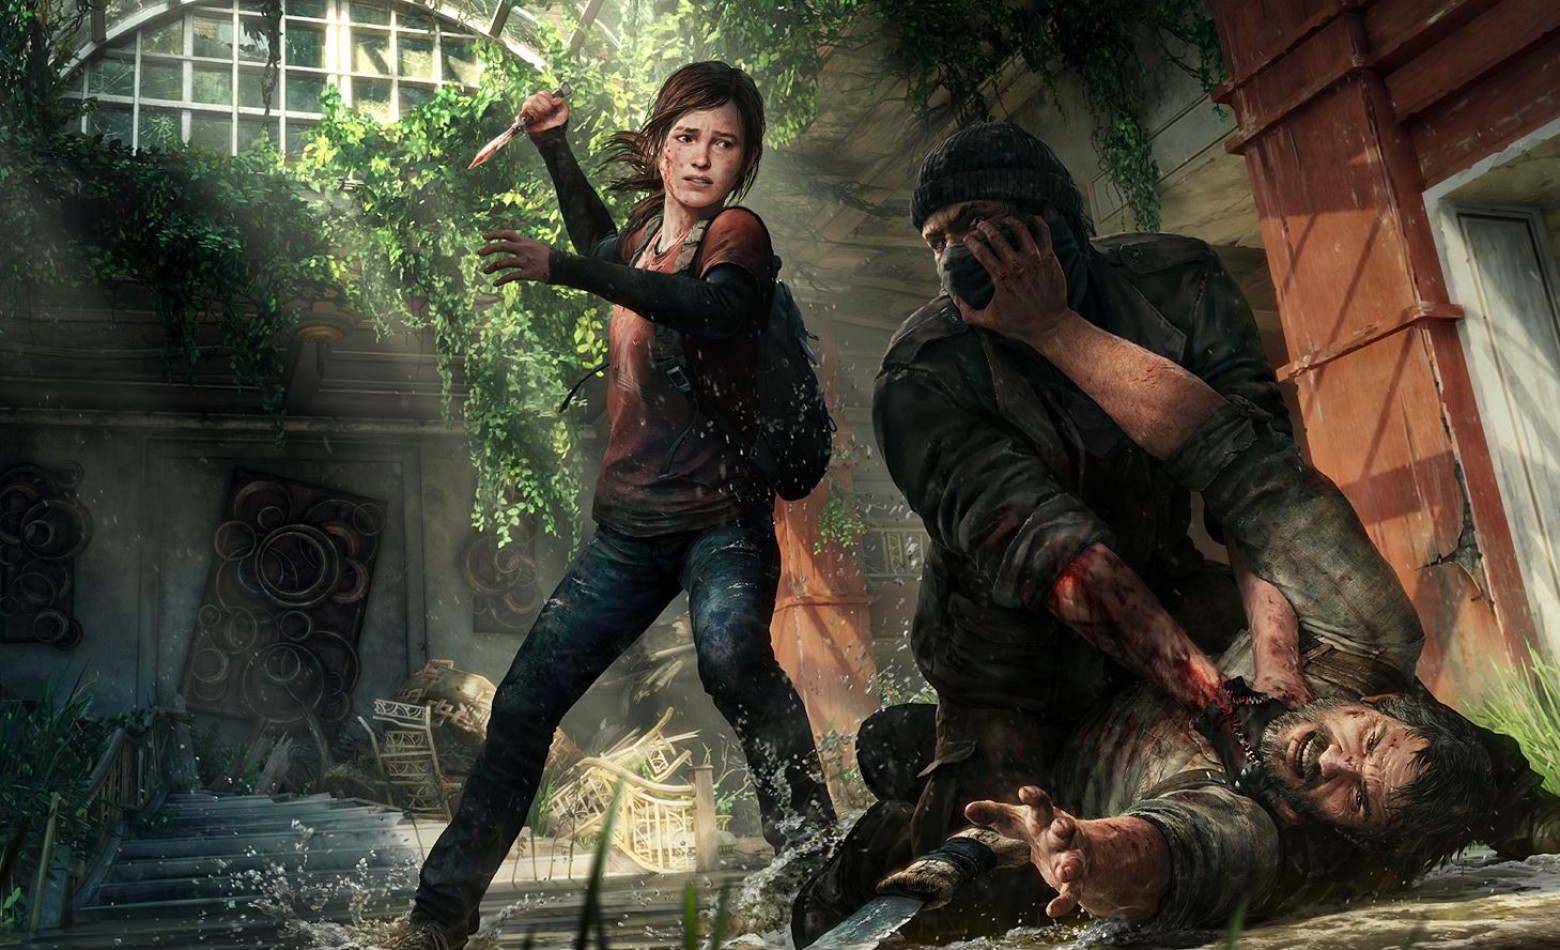 The Last of Us: Remastered serve de experimento para Uncharted 4